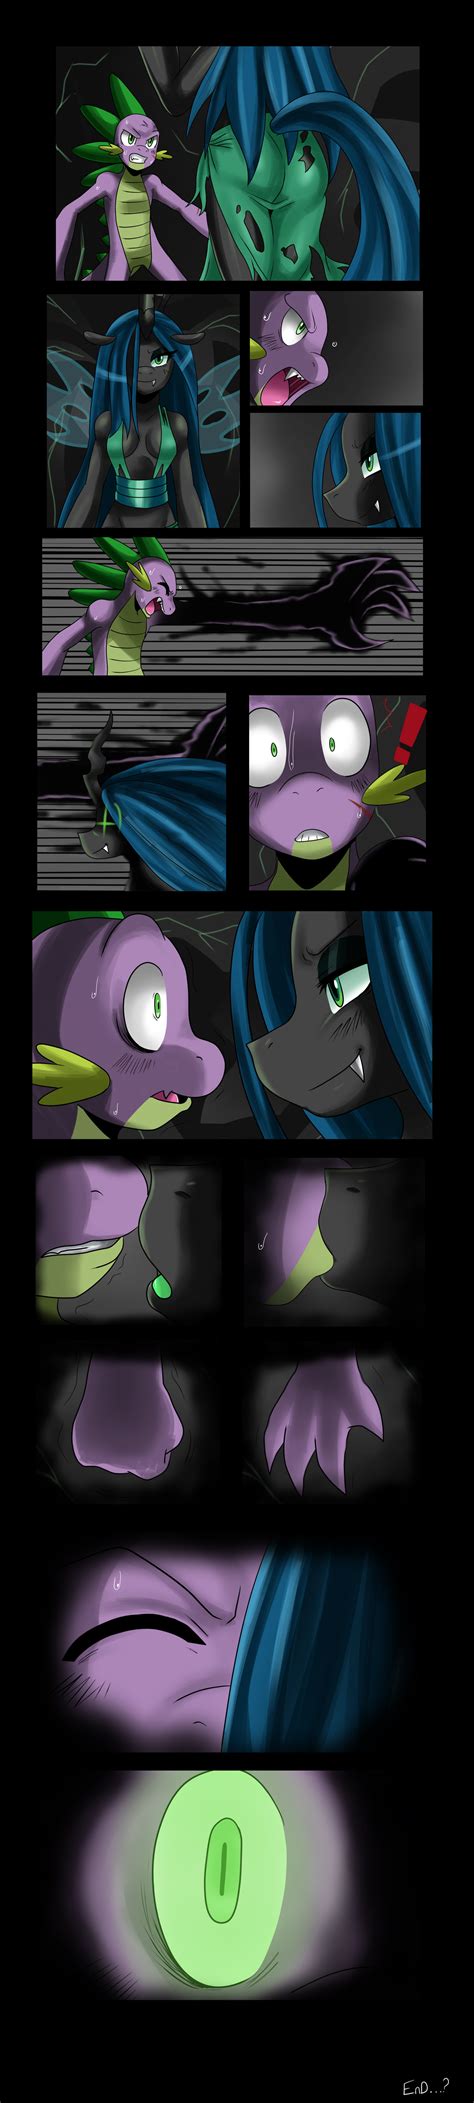 Comic Spike Vs Chrysalis By Ss2sonic On Deviantart With